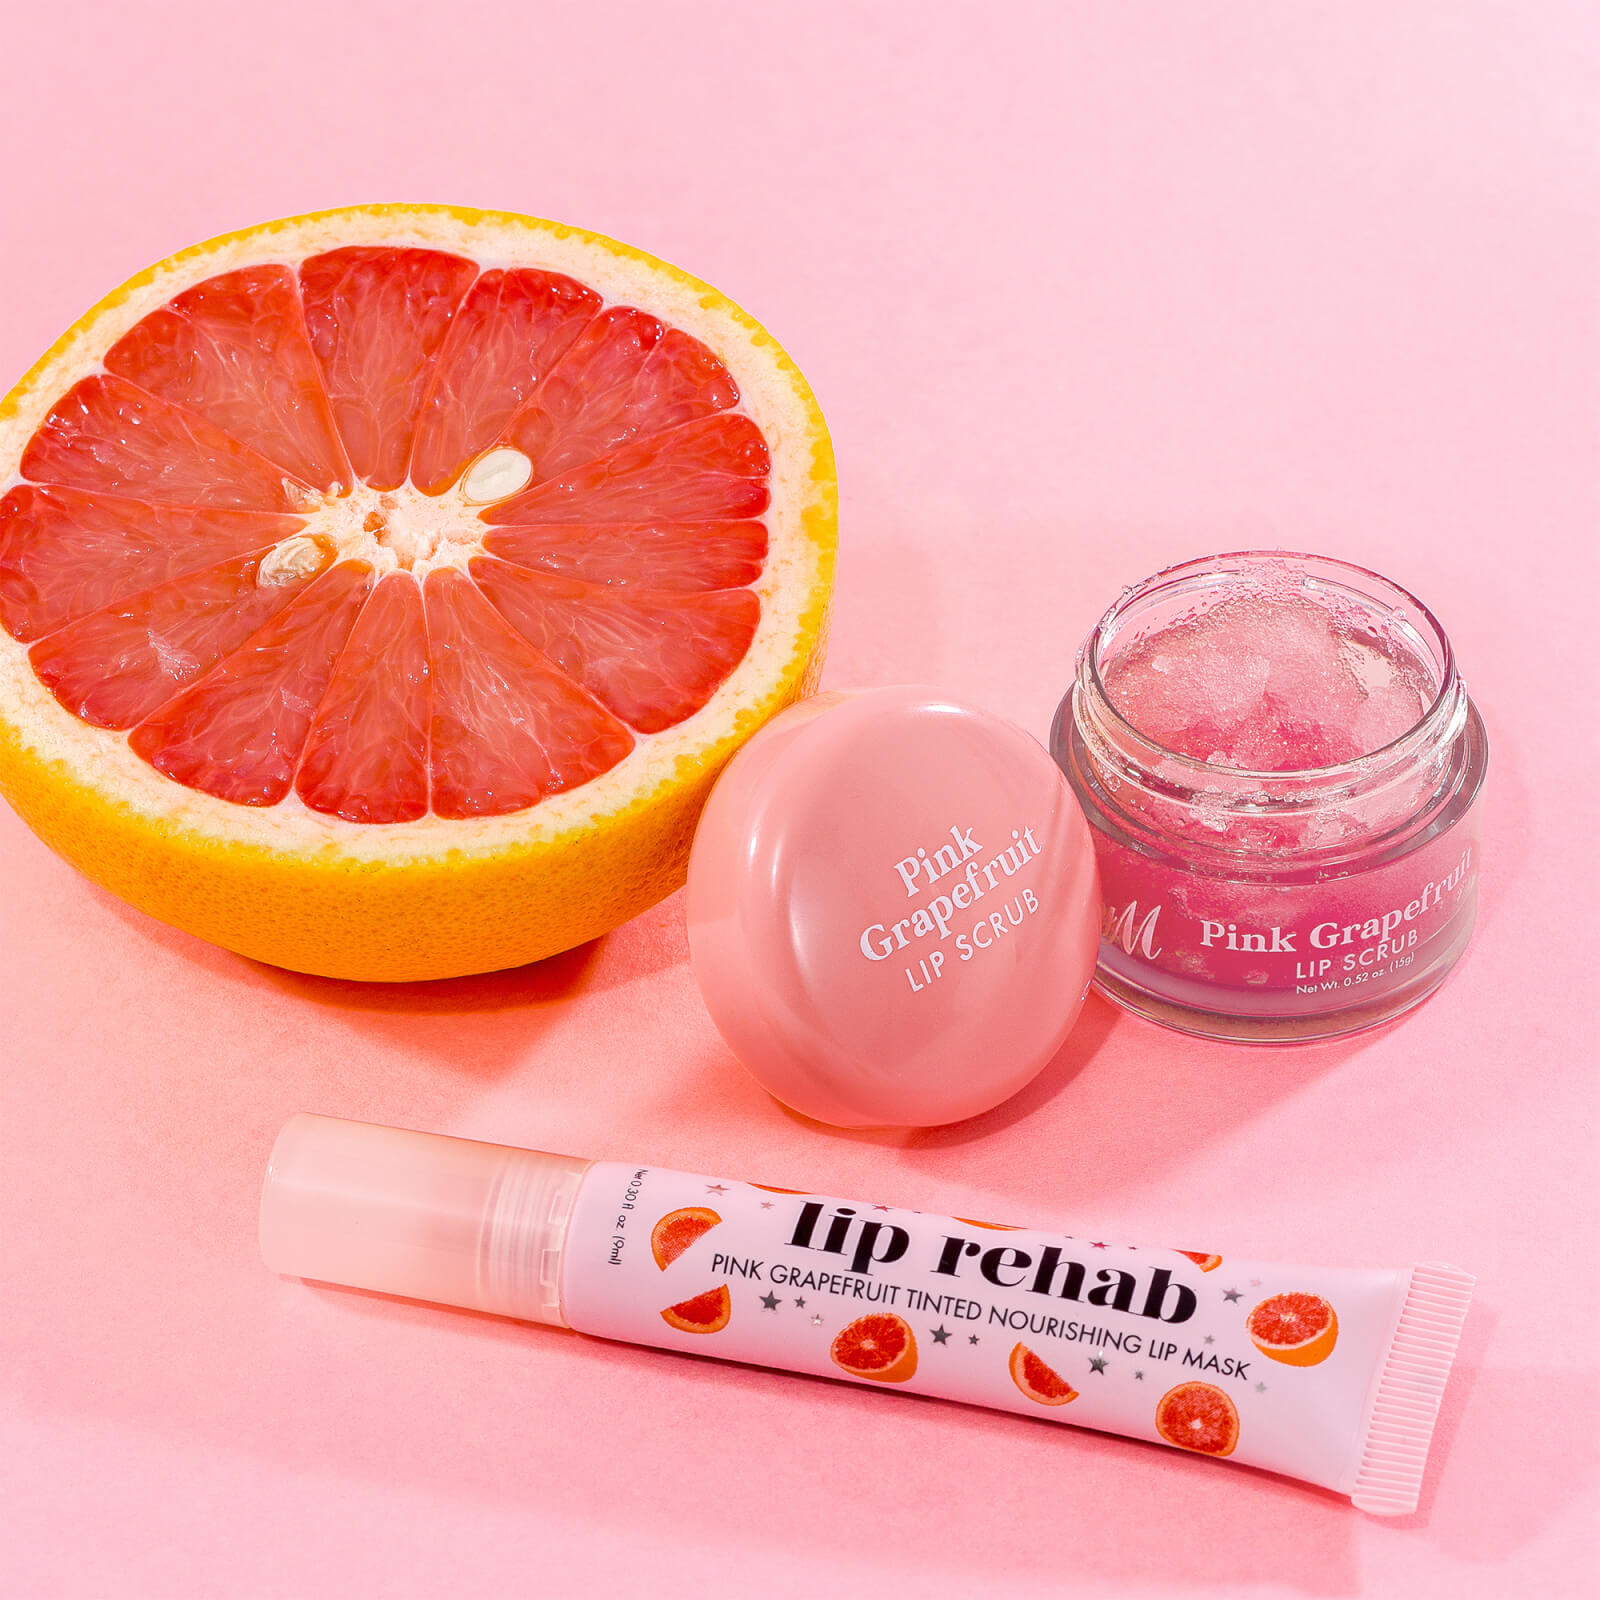 Artikel klicken und genauer betrachten! - The Barry M Cosmetics Lip Rehab Pink Grapefruit Tinted Nourishing Lip Mask seeks to hydrate and soothe dry lips. Infused with a rich blend of hemp seed oil, vitamin E and grapefruit essential oil, the comforting formula helps to protect your lips, promoting a soft and smooth appearance while delivering a subtle pink tint. | im Online Shop kaufen